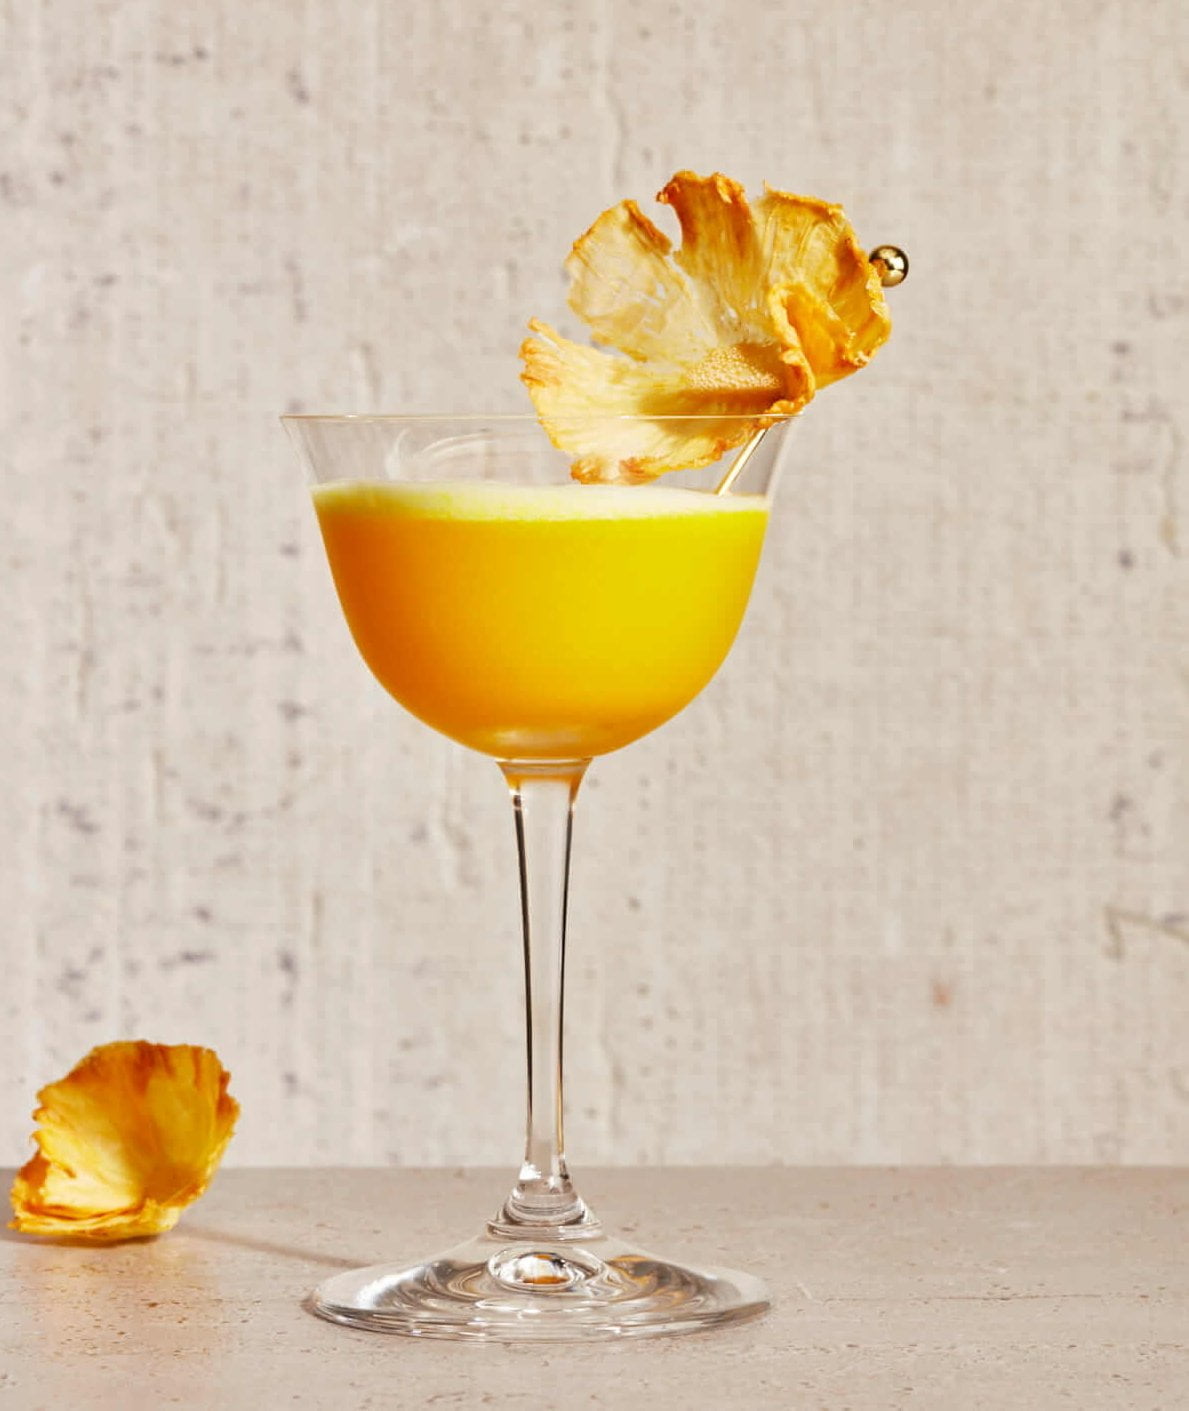 A bright orange cocktail with a pineapple garnish.